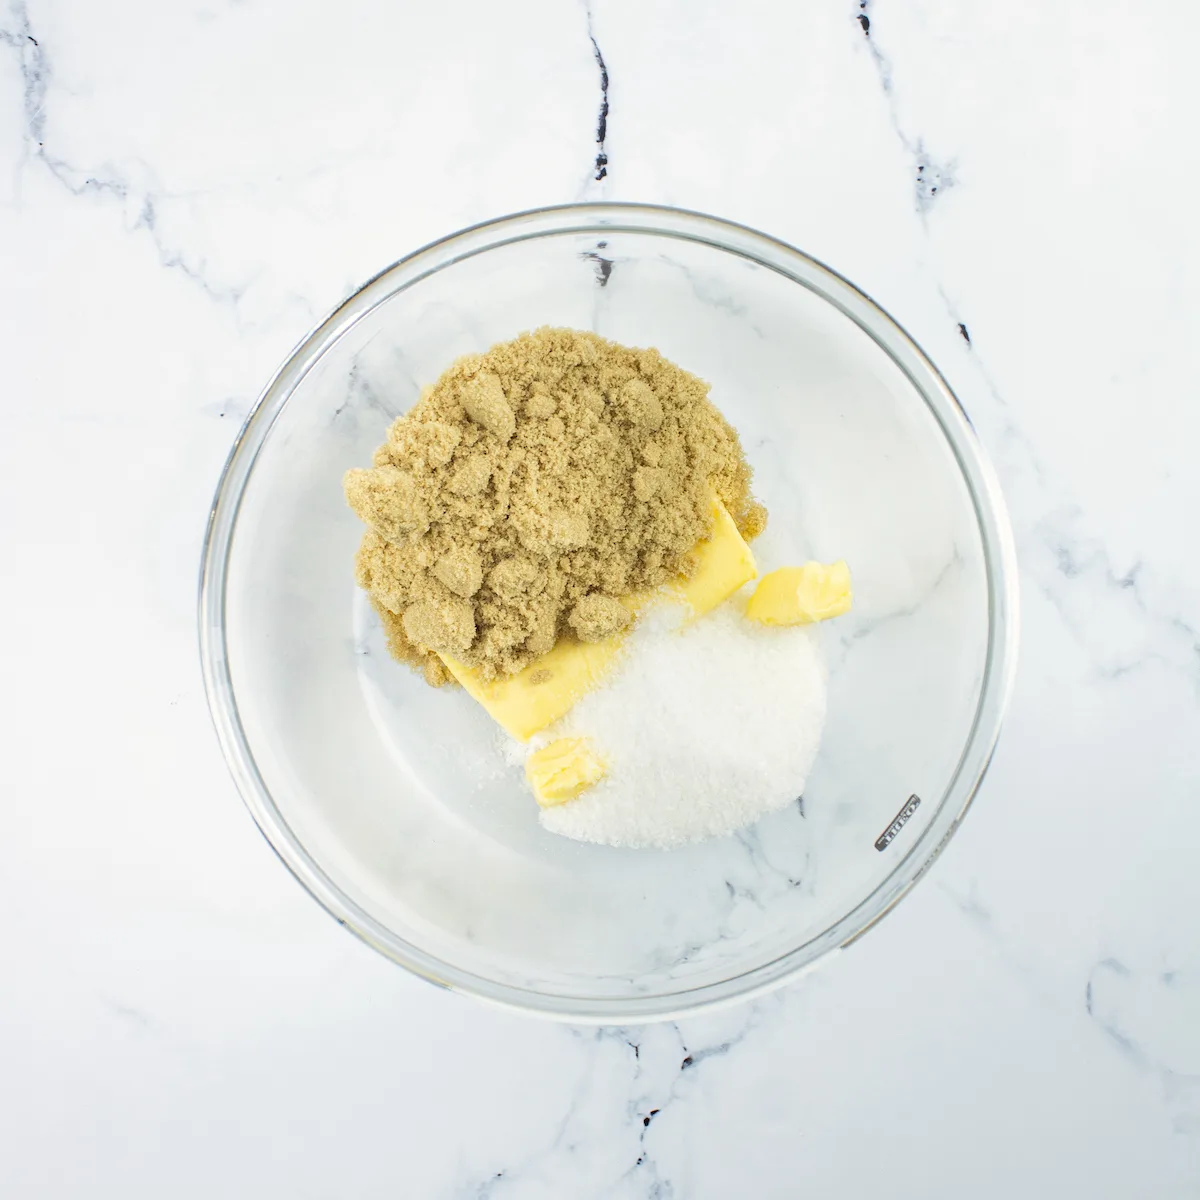 brown sugar, butter, and granulated sugar in a clear glass bowl